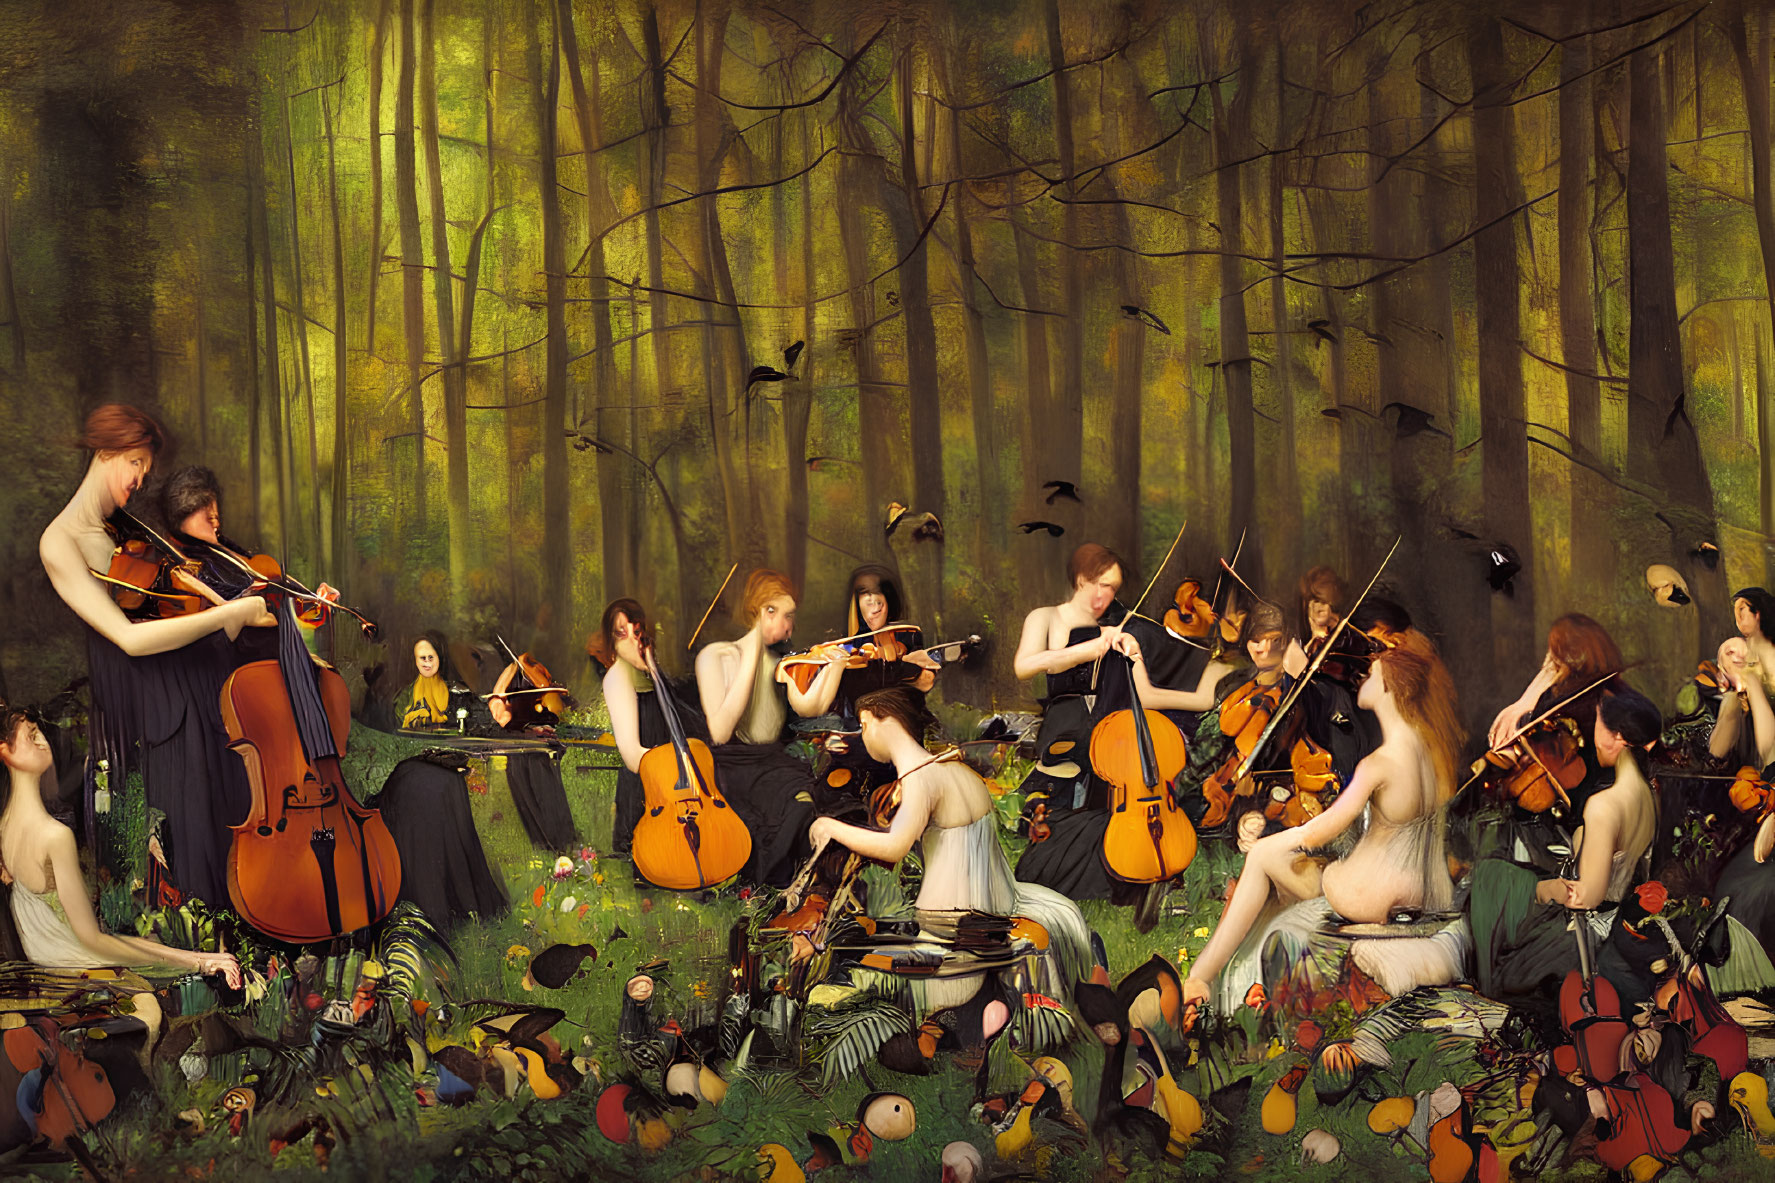 Ethereal women playing string instruments in whimsical forest